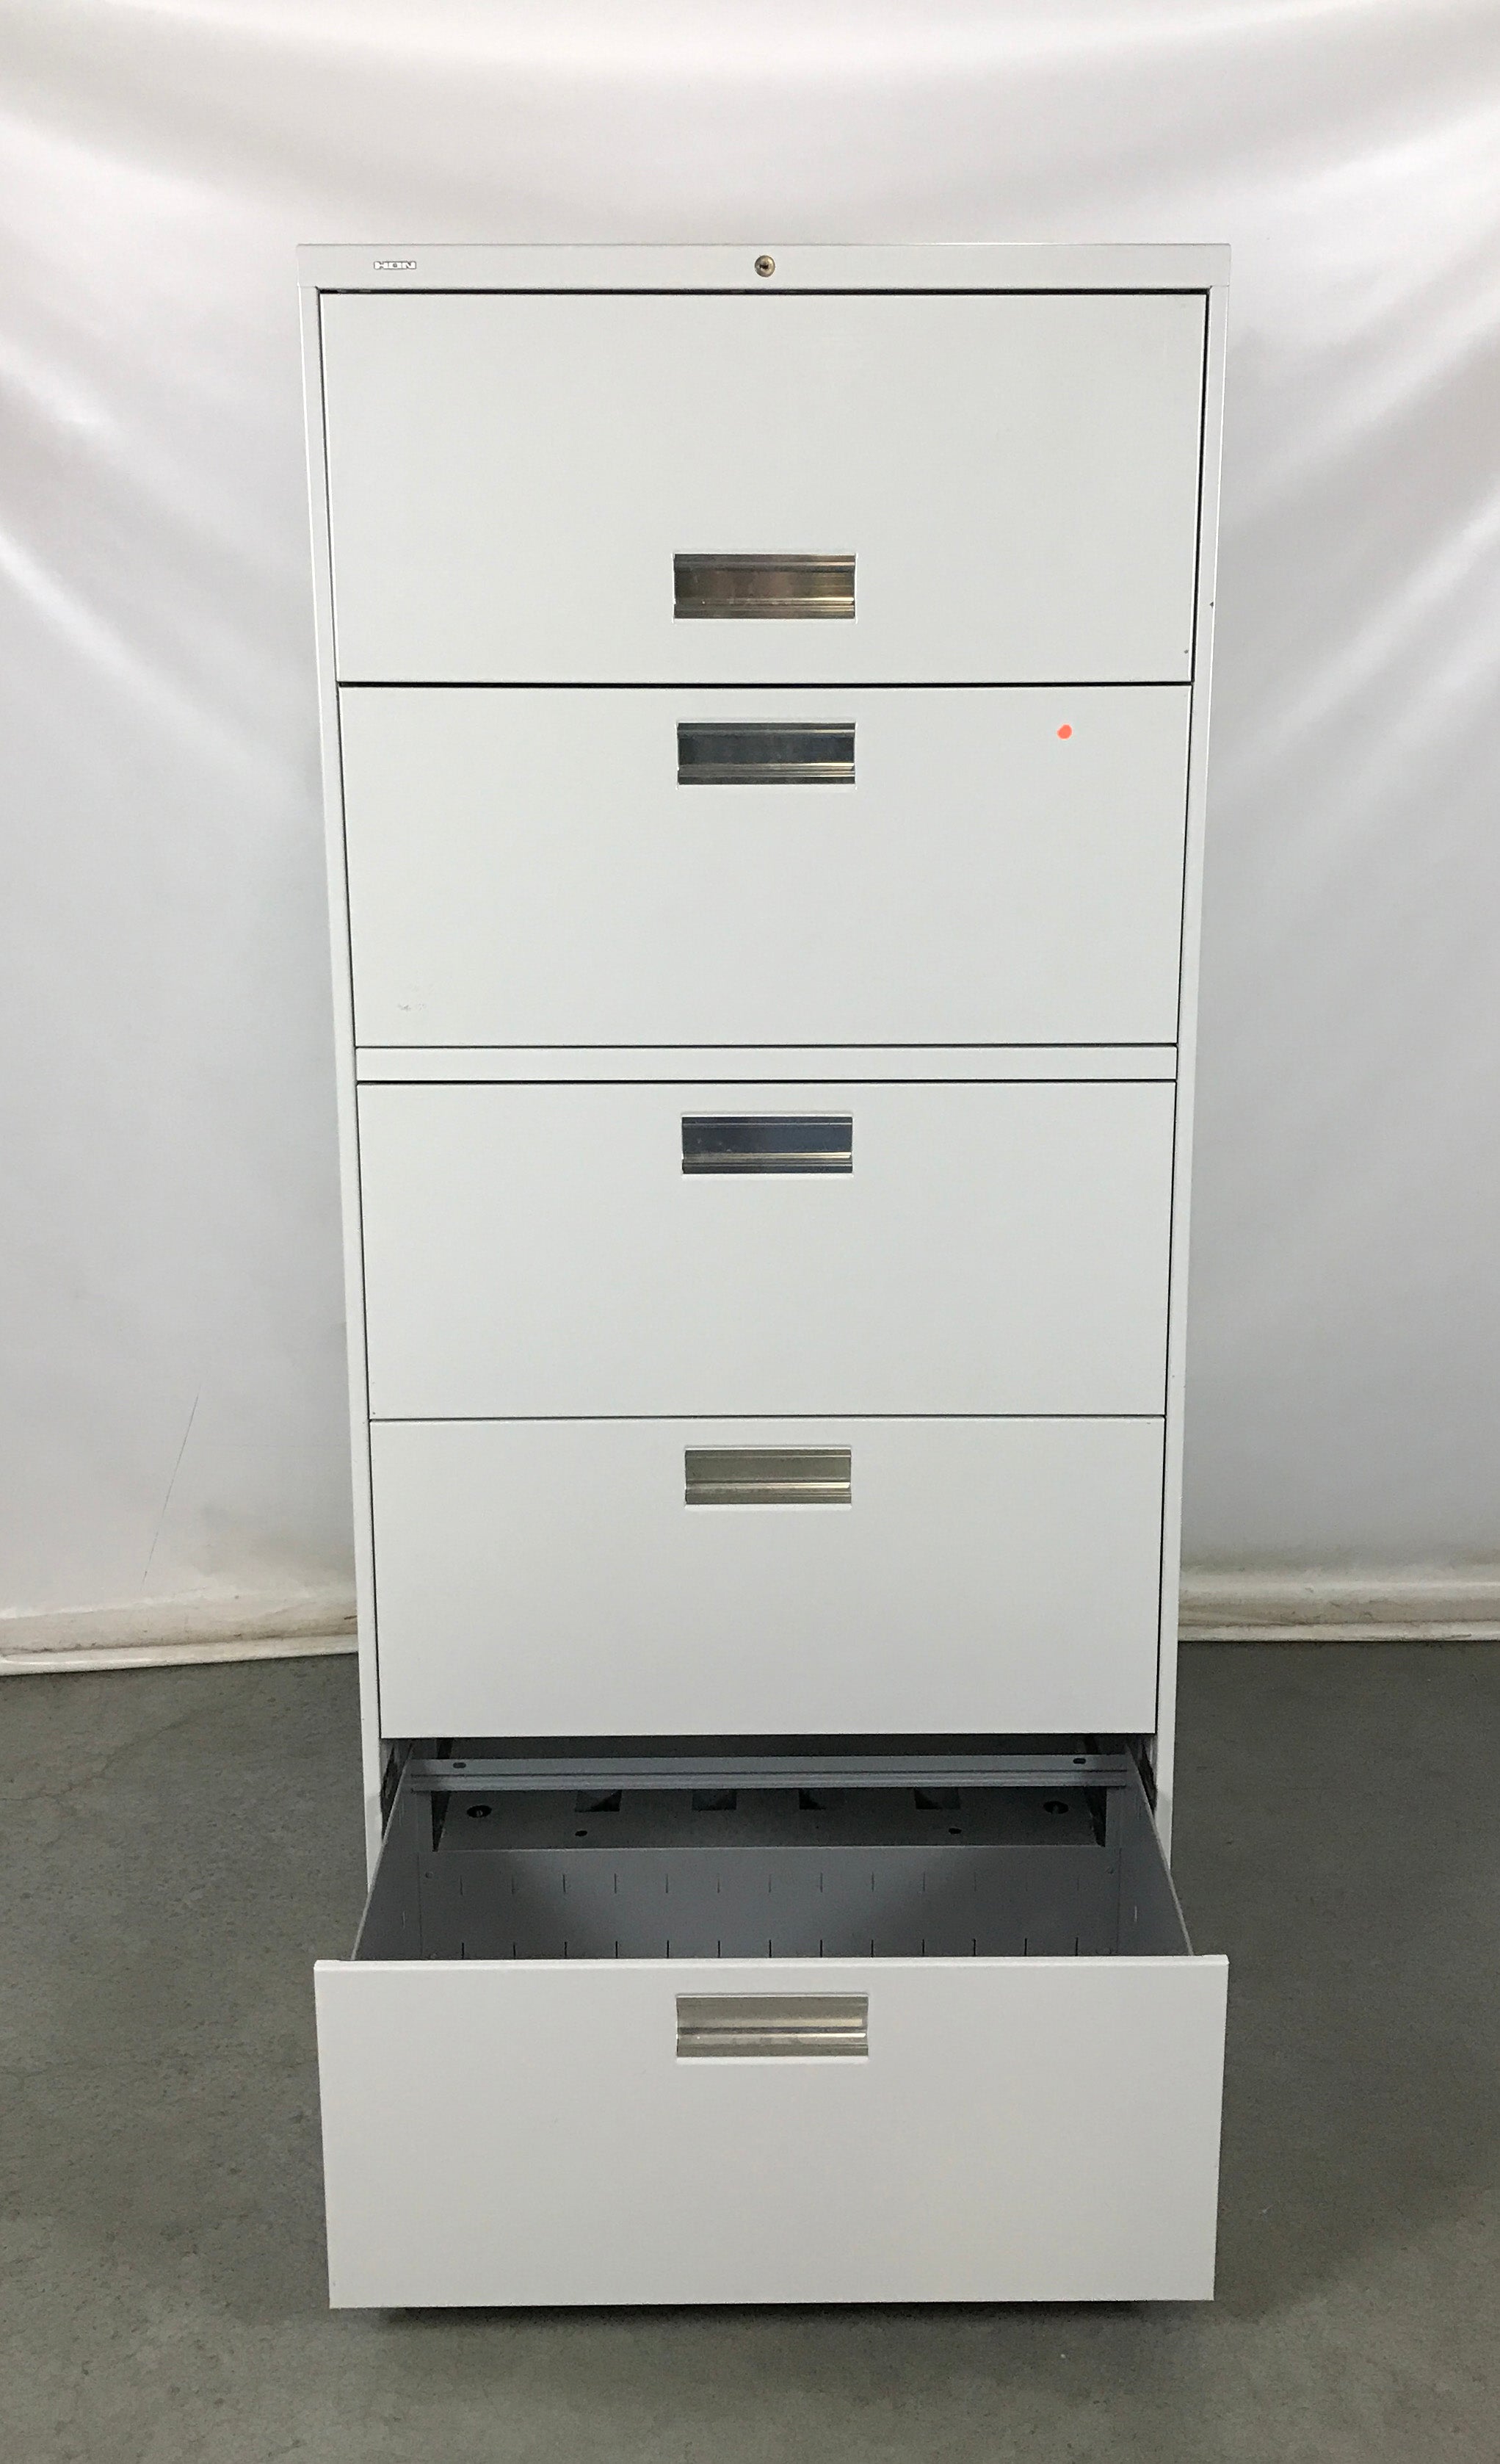 HON Gray 5-Drawer Lateral File Cabinet